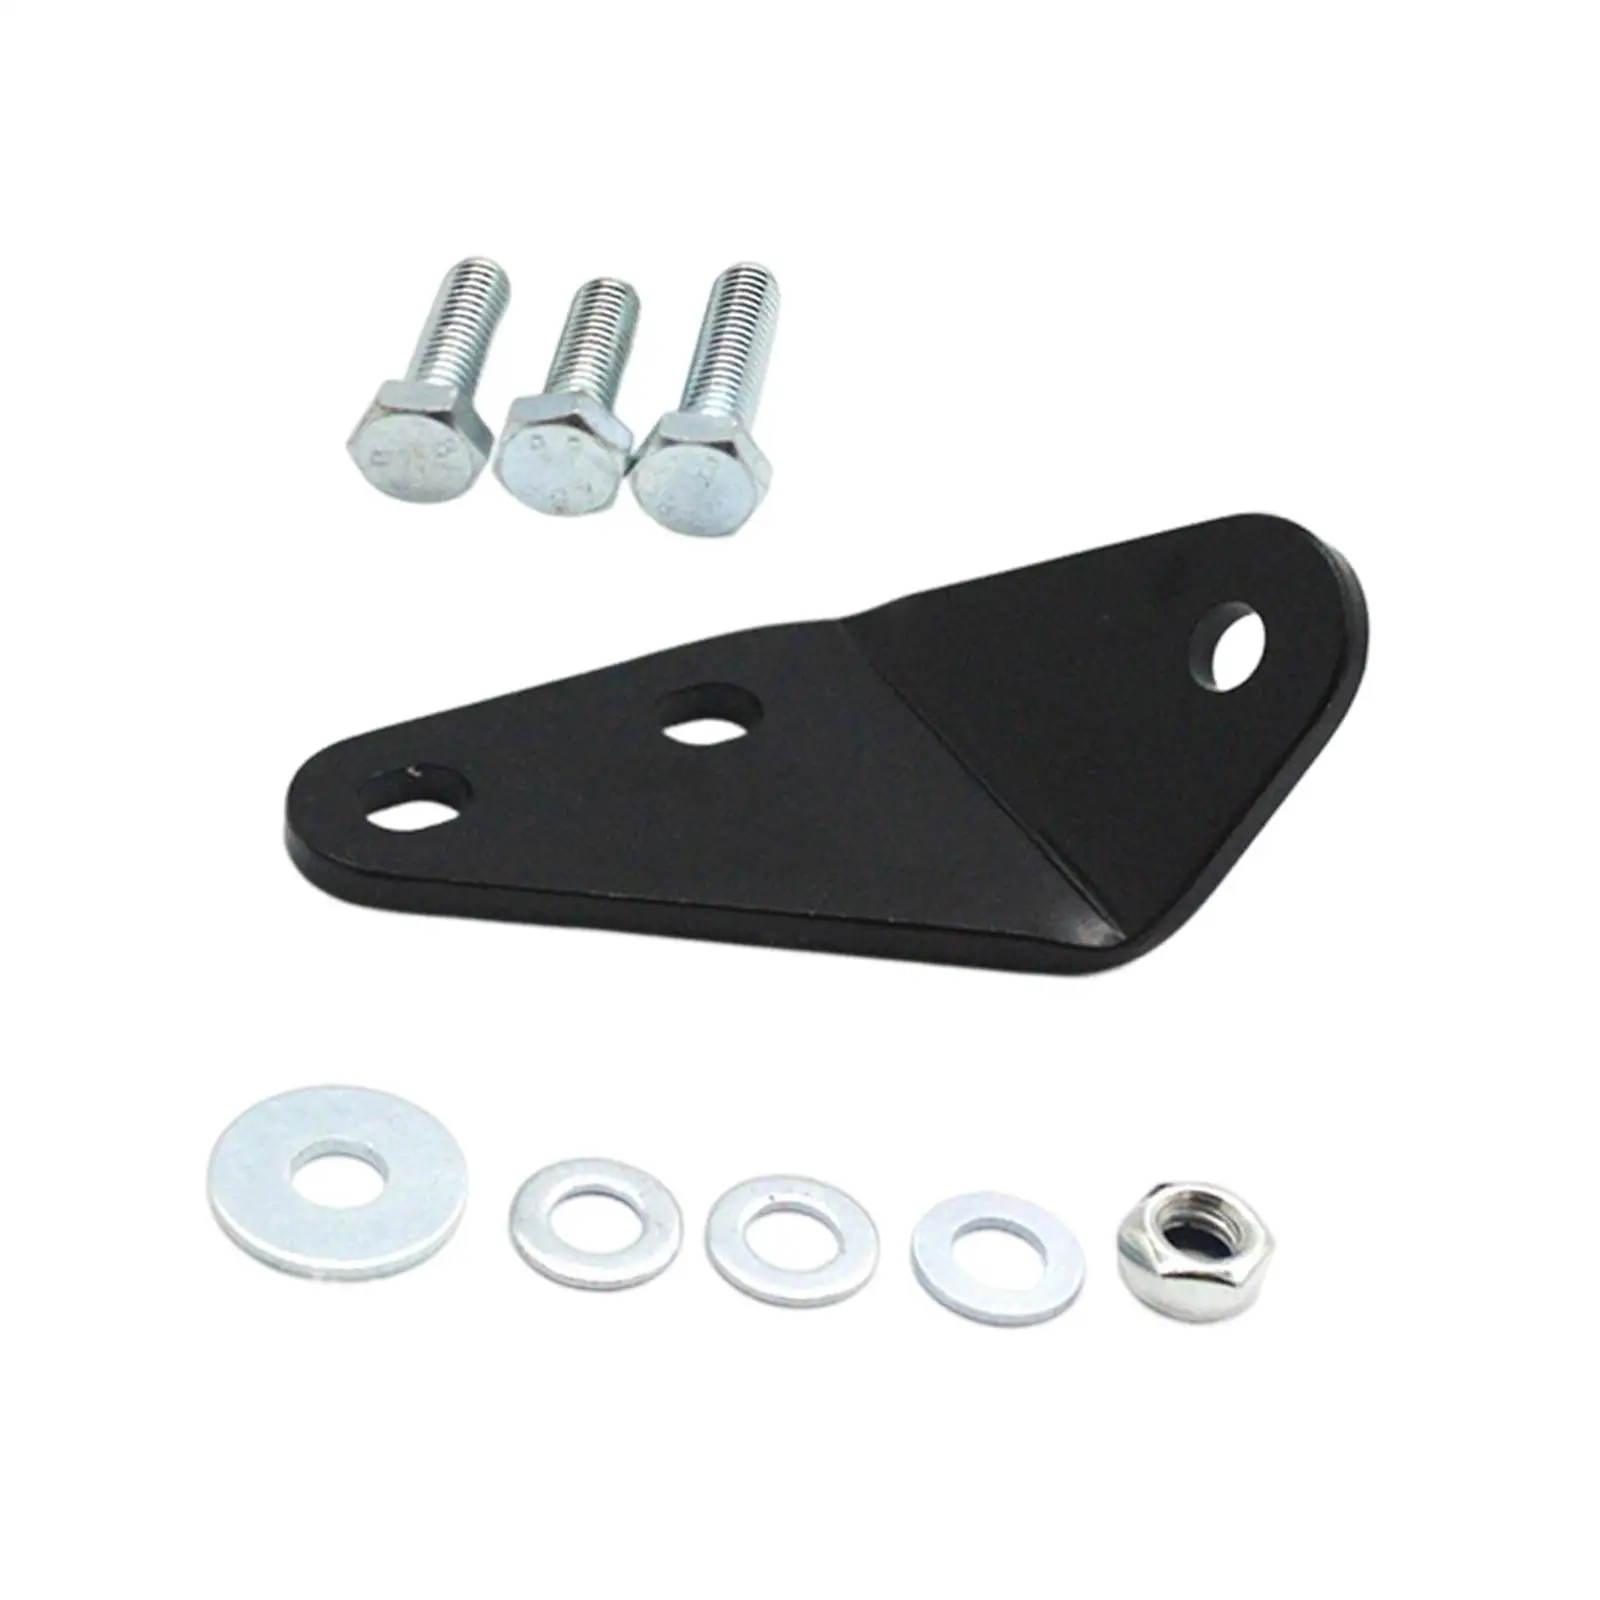 Clutch Pedal Repair Bracket Metal High Quality Sturdy Replacement Parts for VW T4 Transporter Multivan Caravelle Accessory